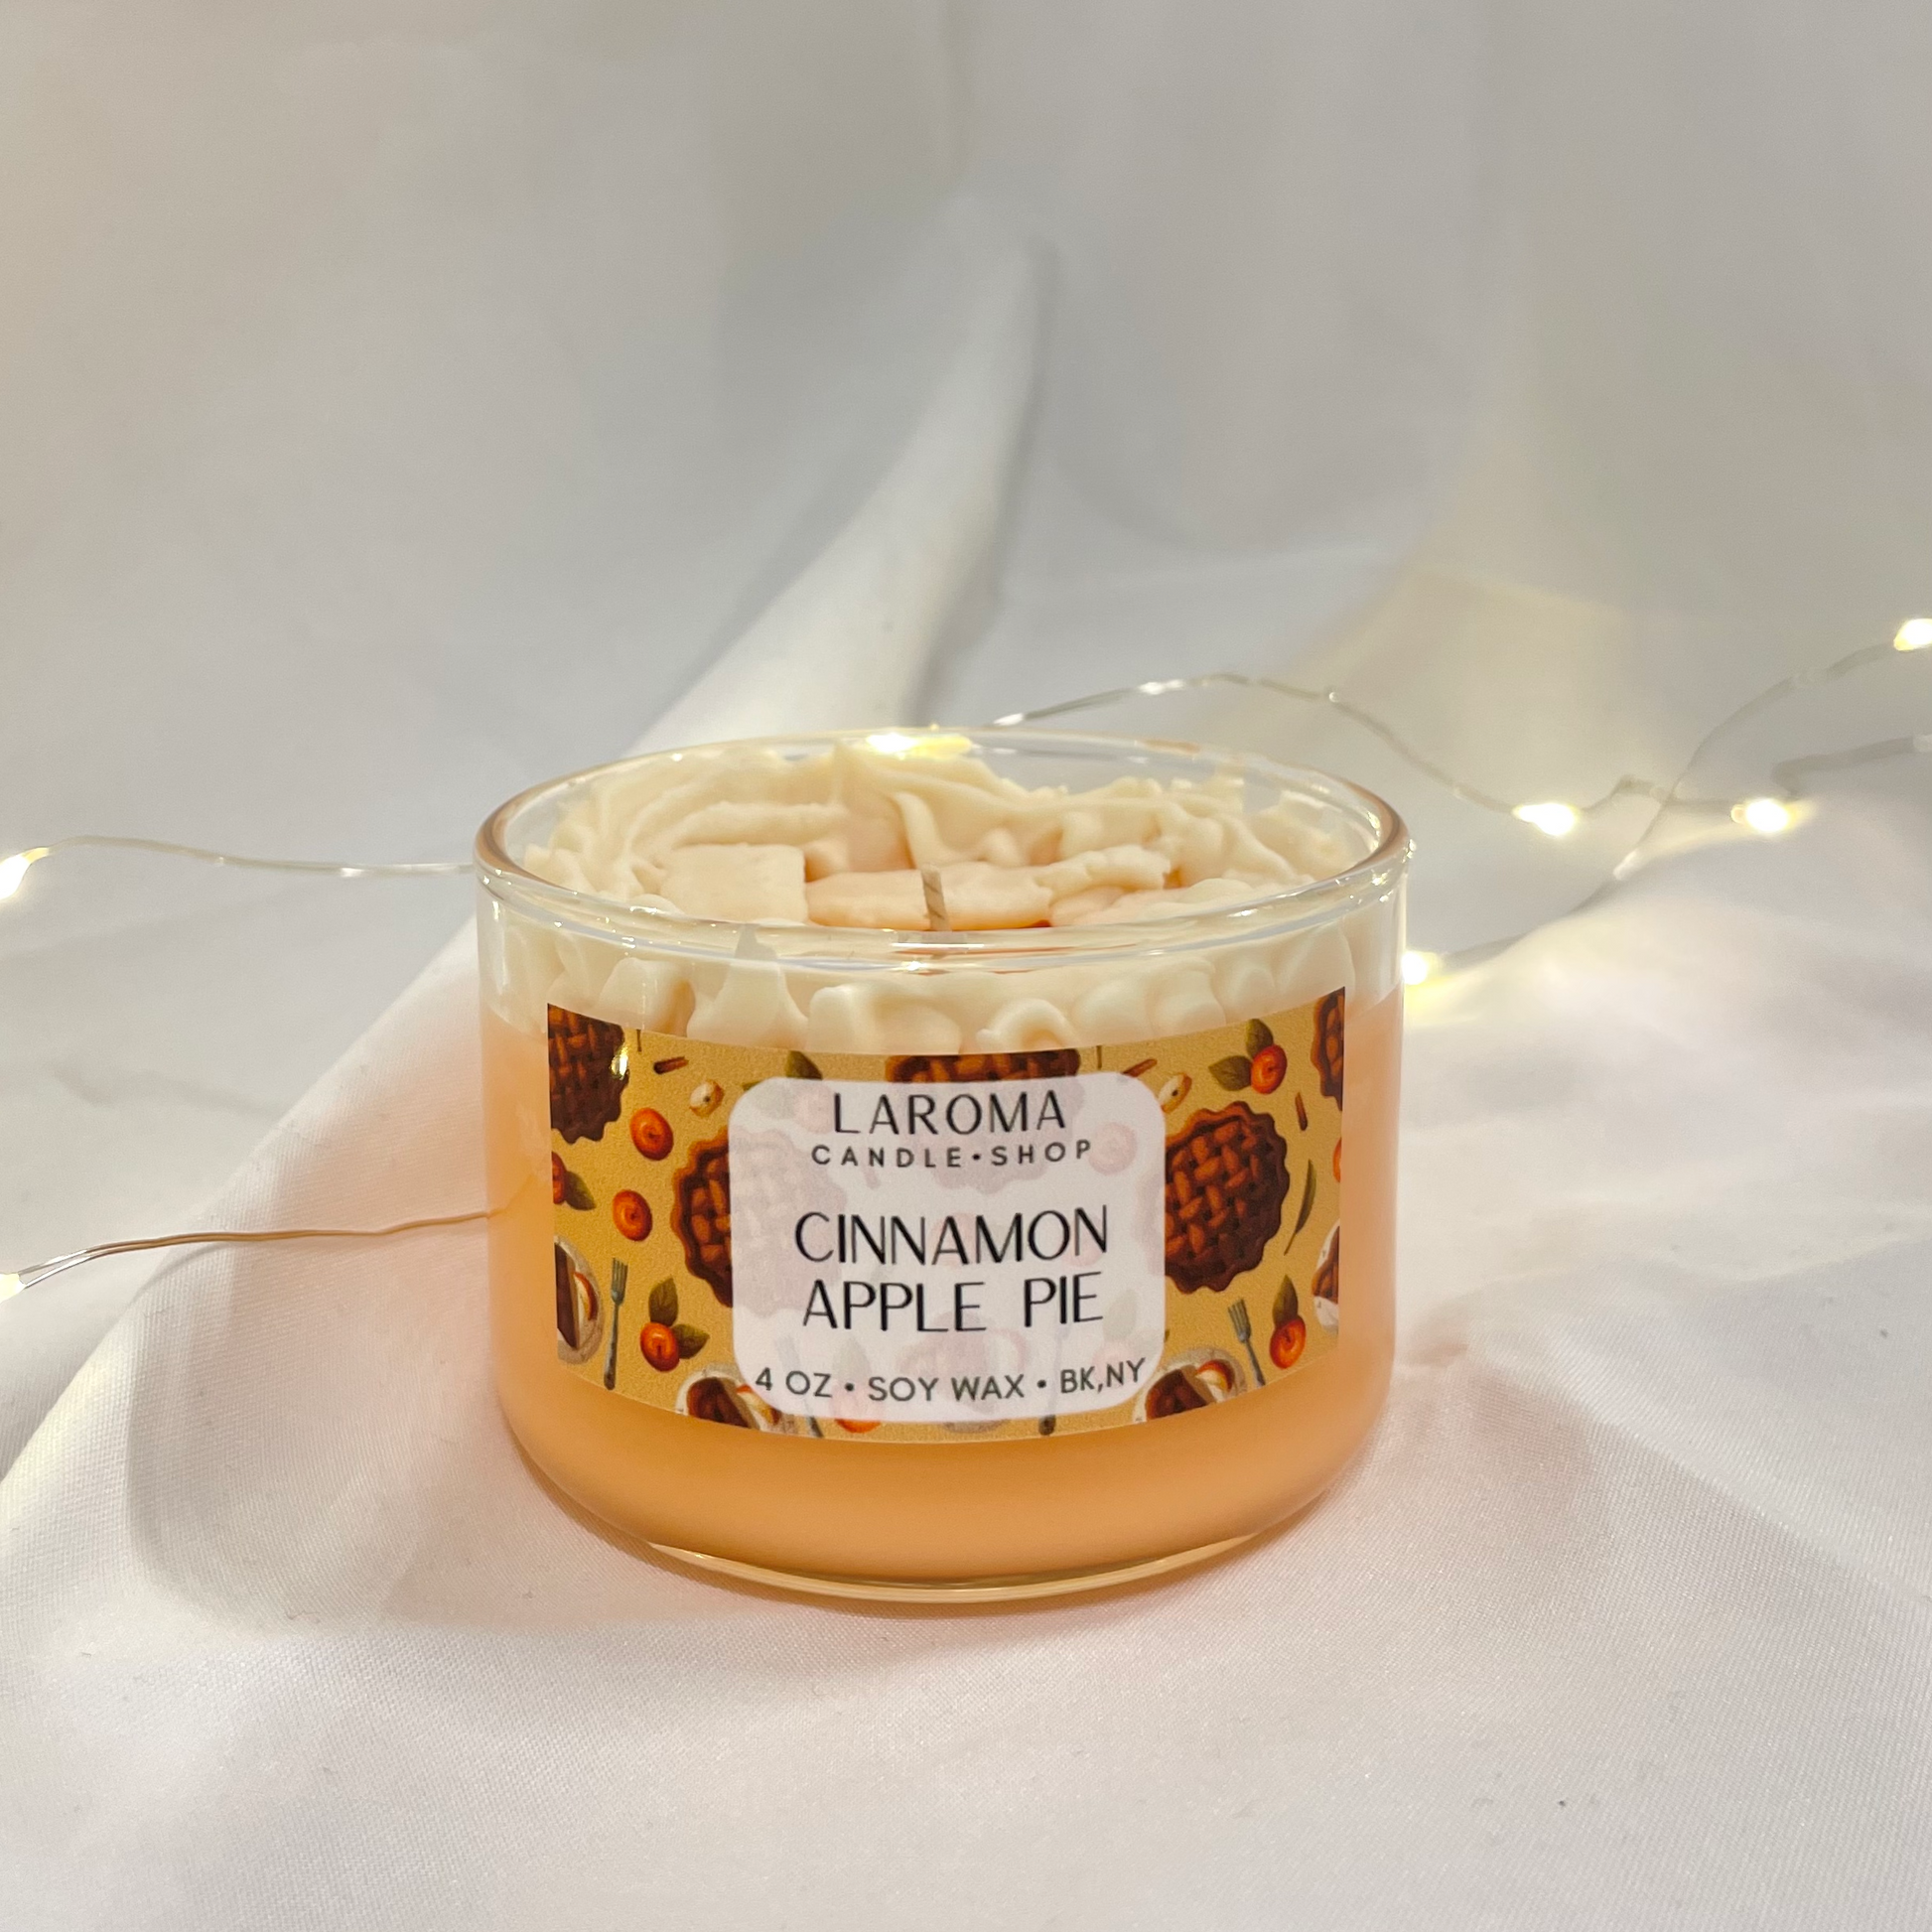 cinnamon apple pie candle, dessert candle, pie shaped candle, with crust, fake food